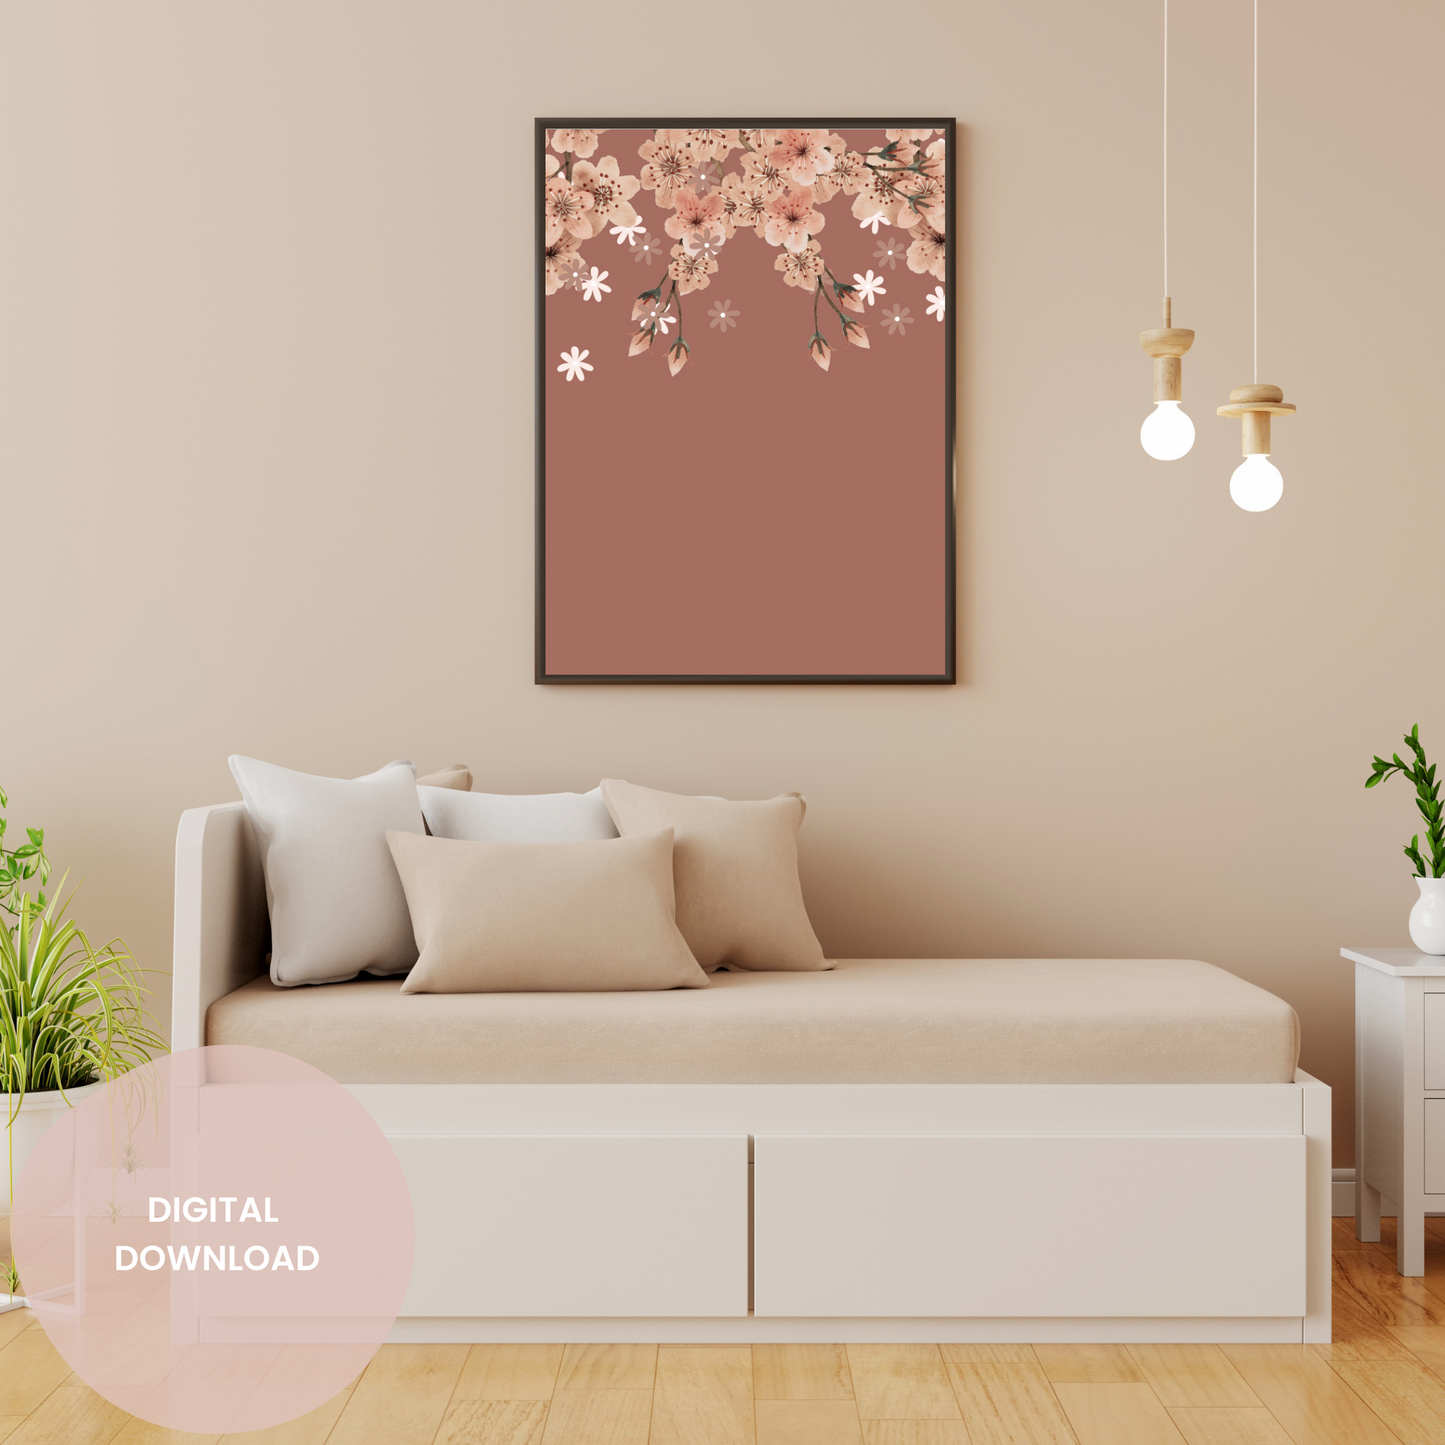 Shades of Pink Falling Blossoms Tree Wall Collage Poster - Whimsical Nature Display